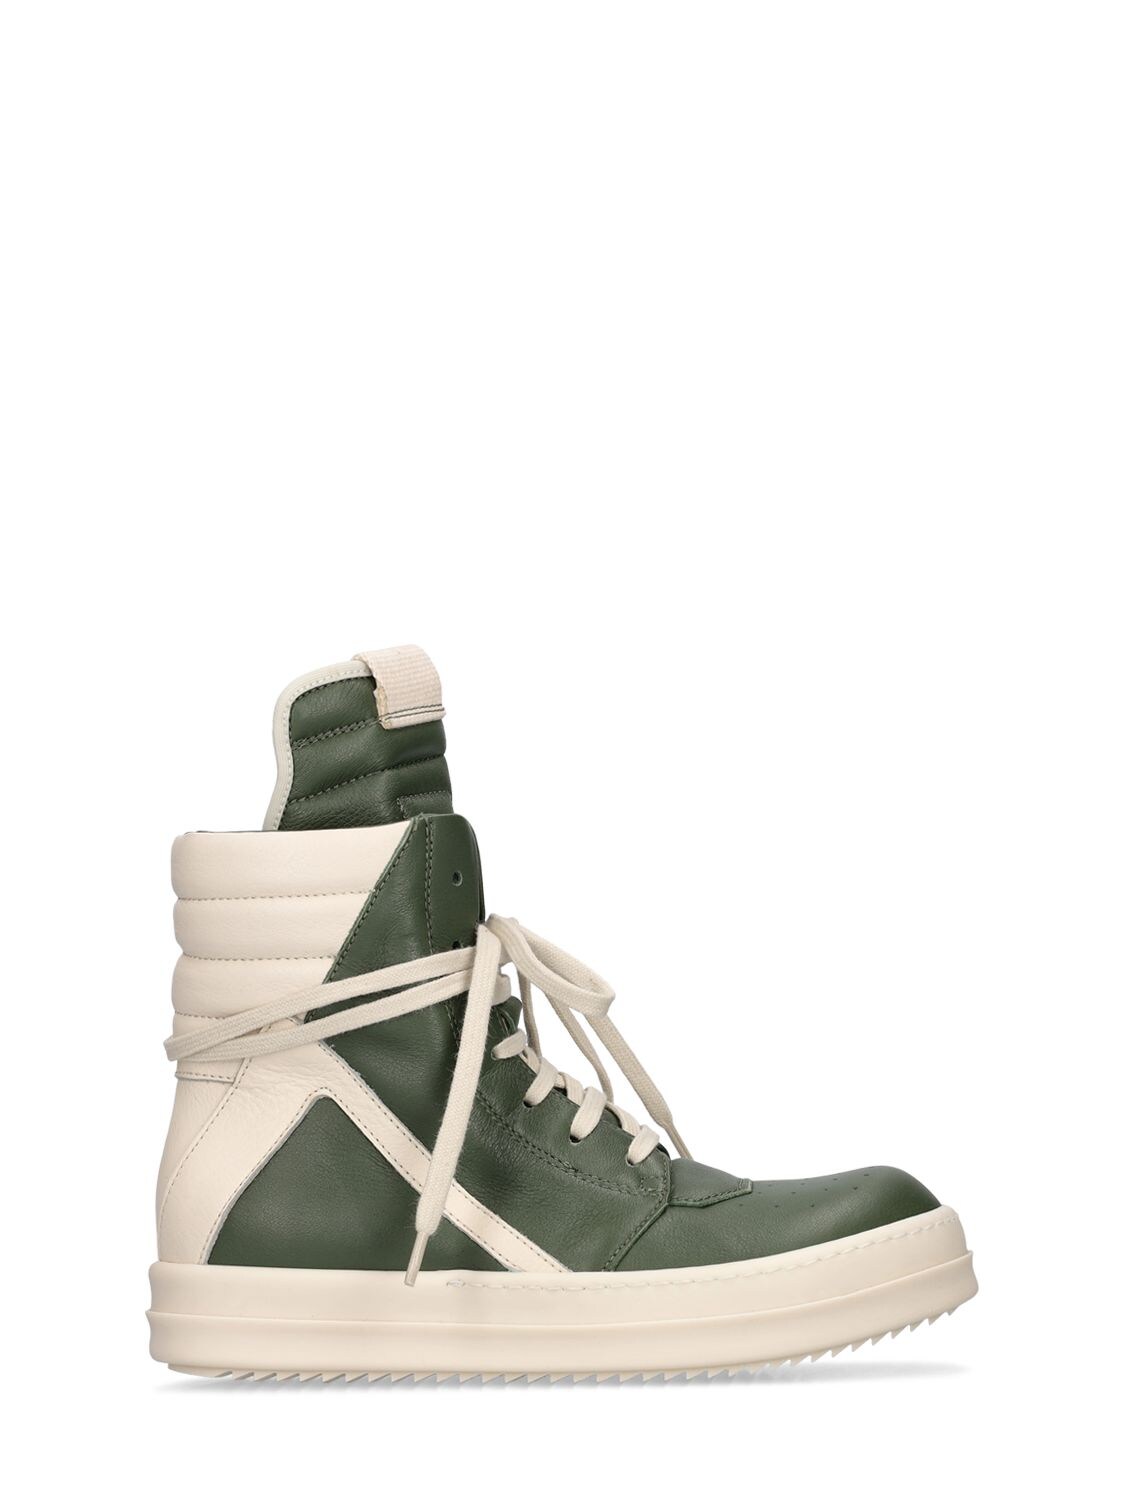 Rick Owens Kids' Geobasket Leather High Top Sneakers In Green,off White